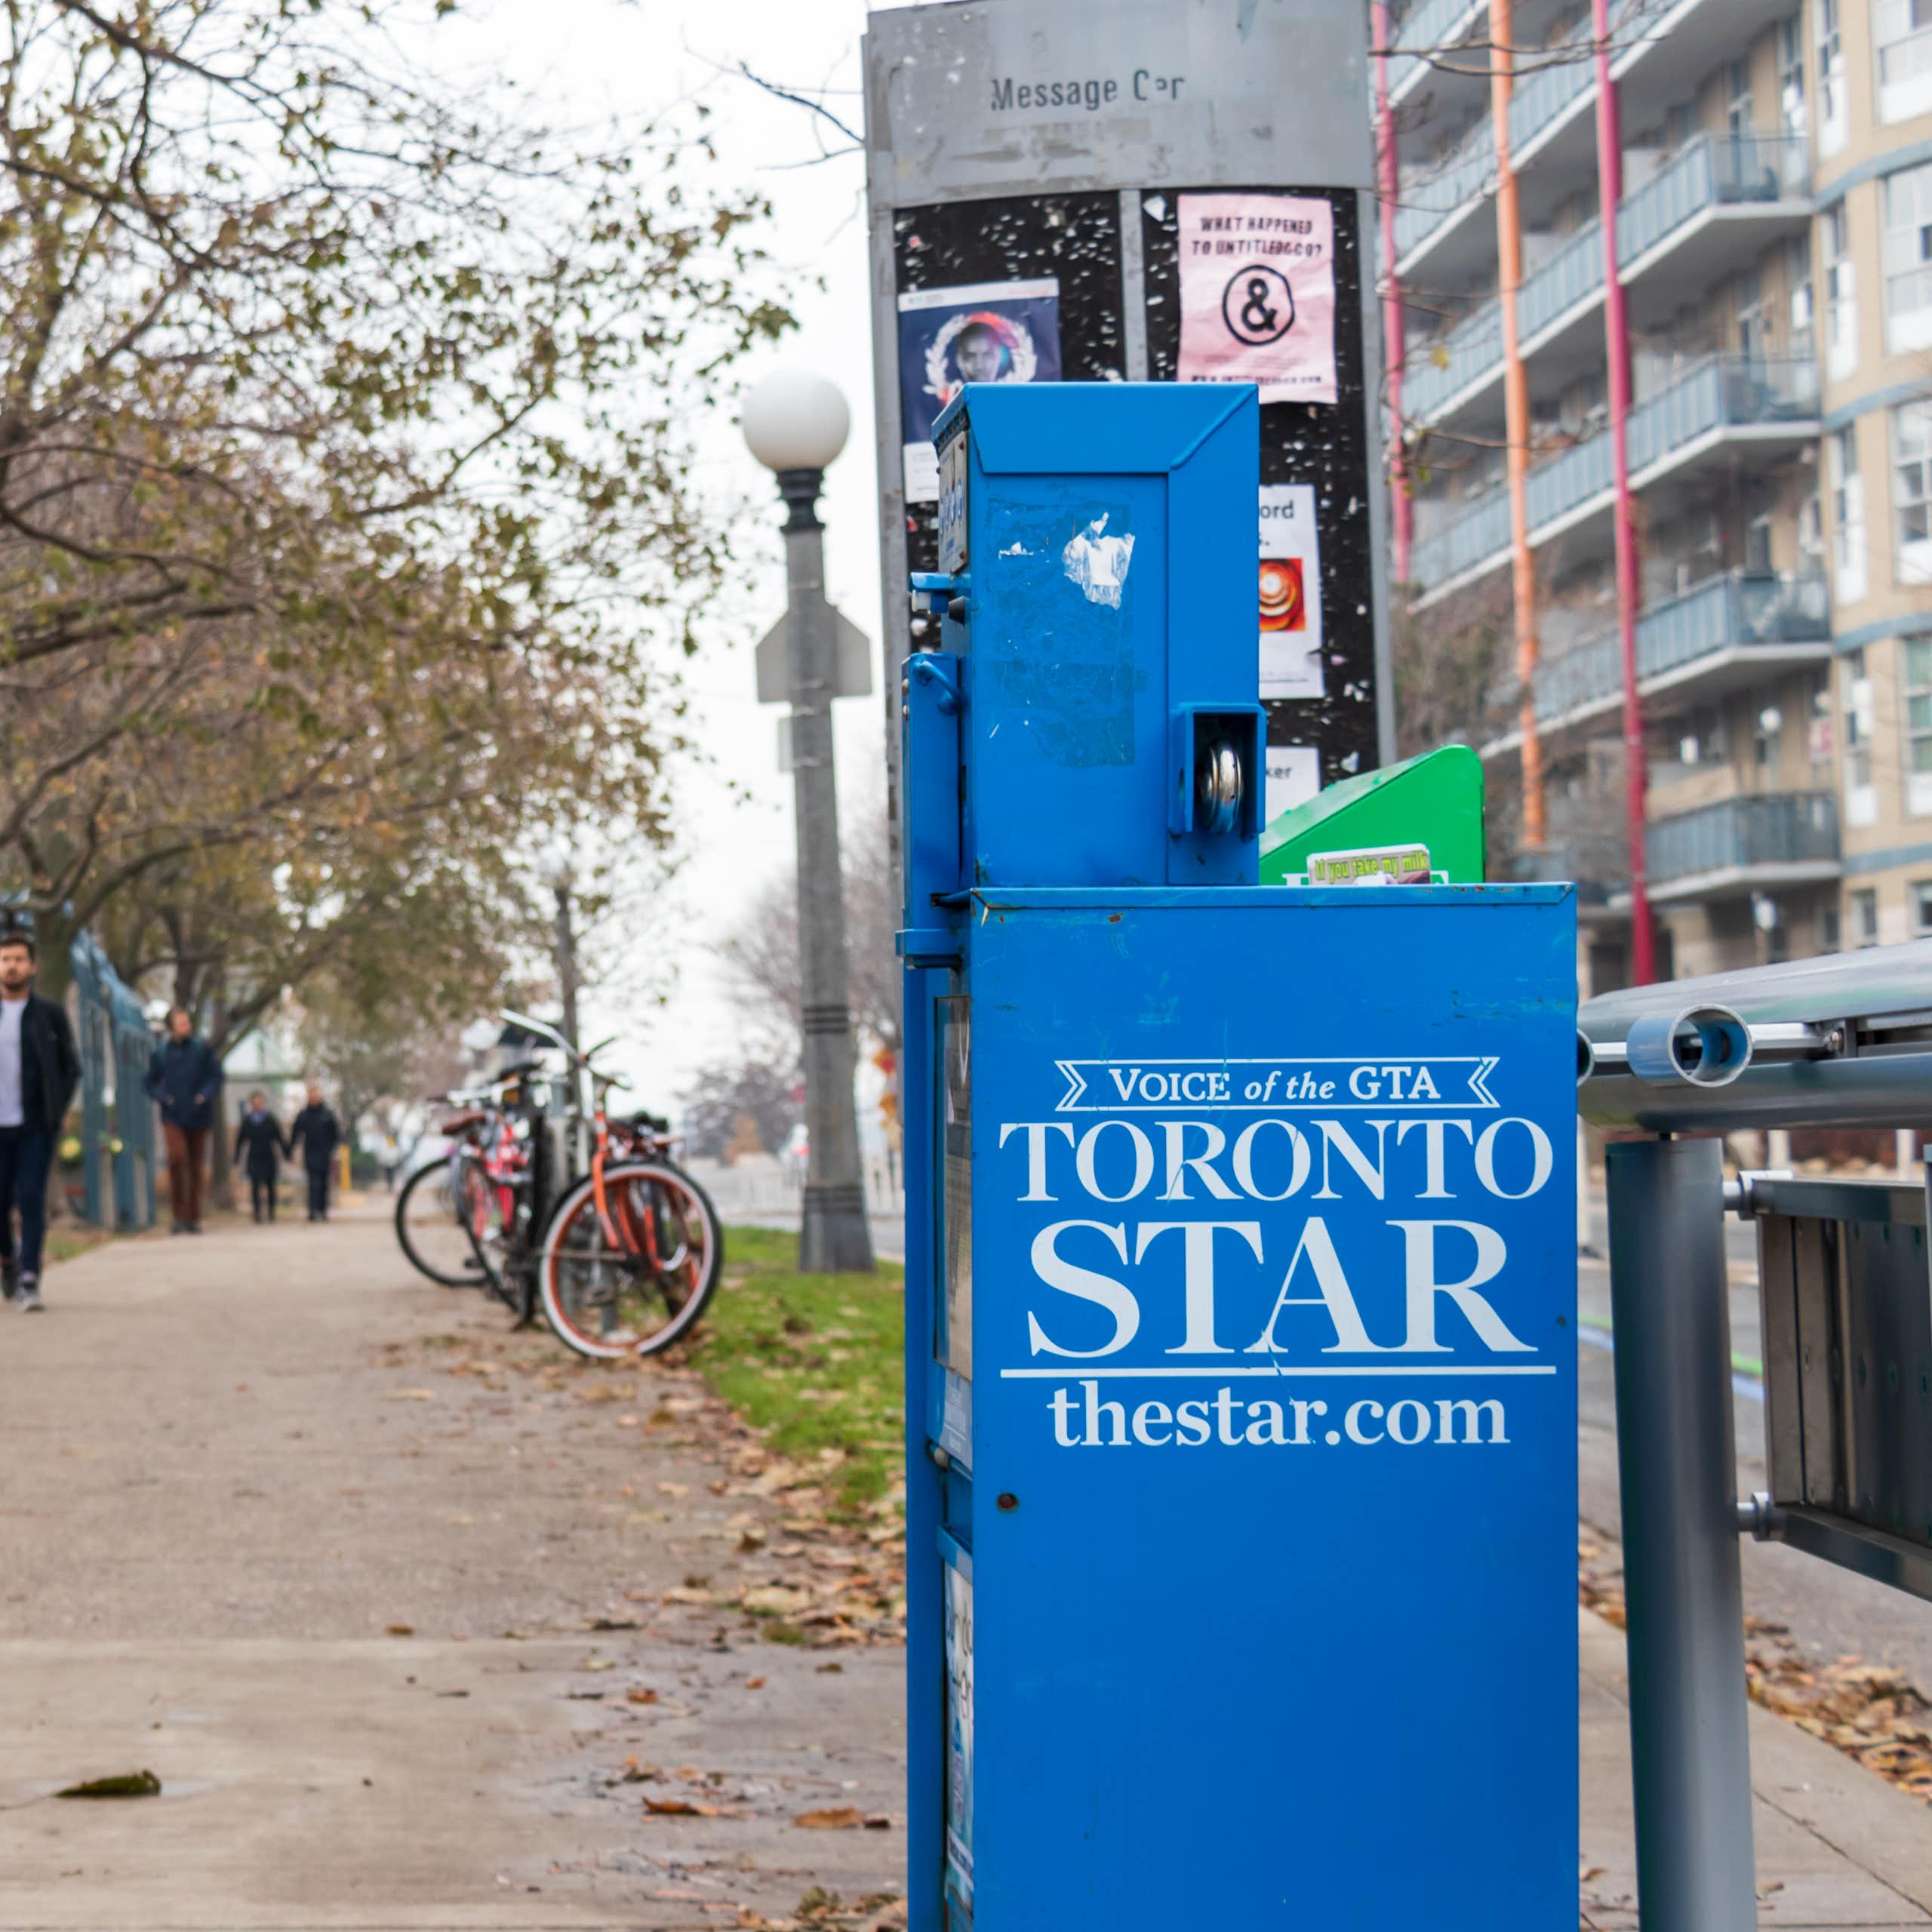 A newspaper vending machine with the Toronto Start logo on the side sits beside a city sidewalk